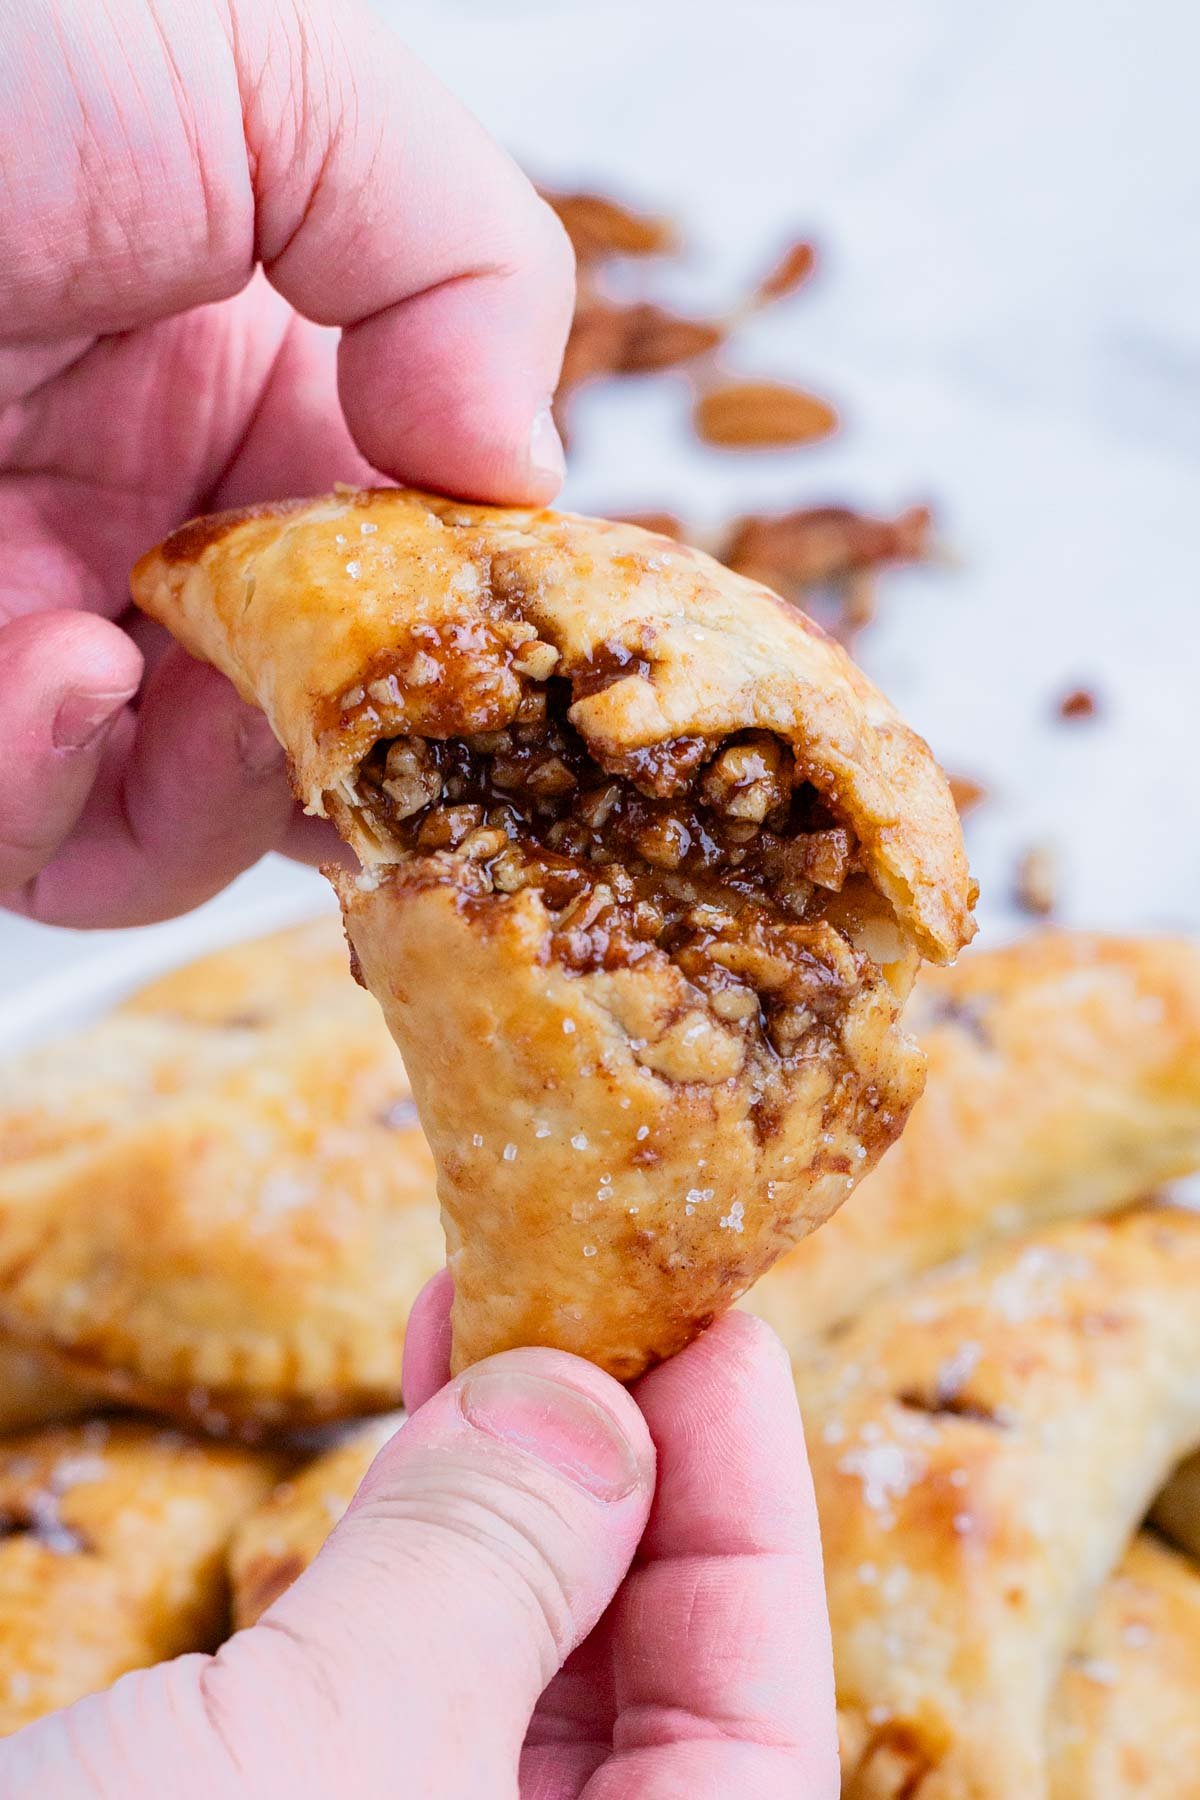 A hand rips open a pecan hand pie to show the filling.